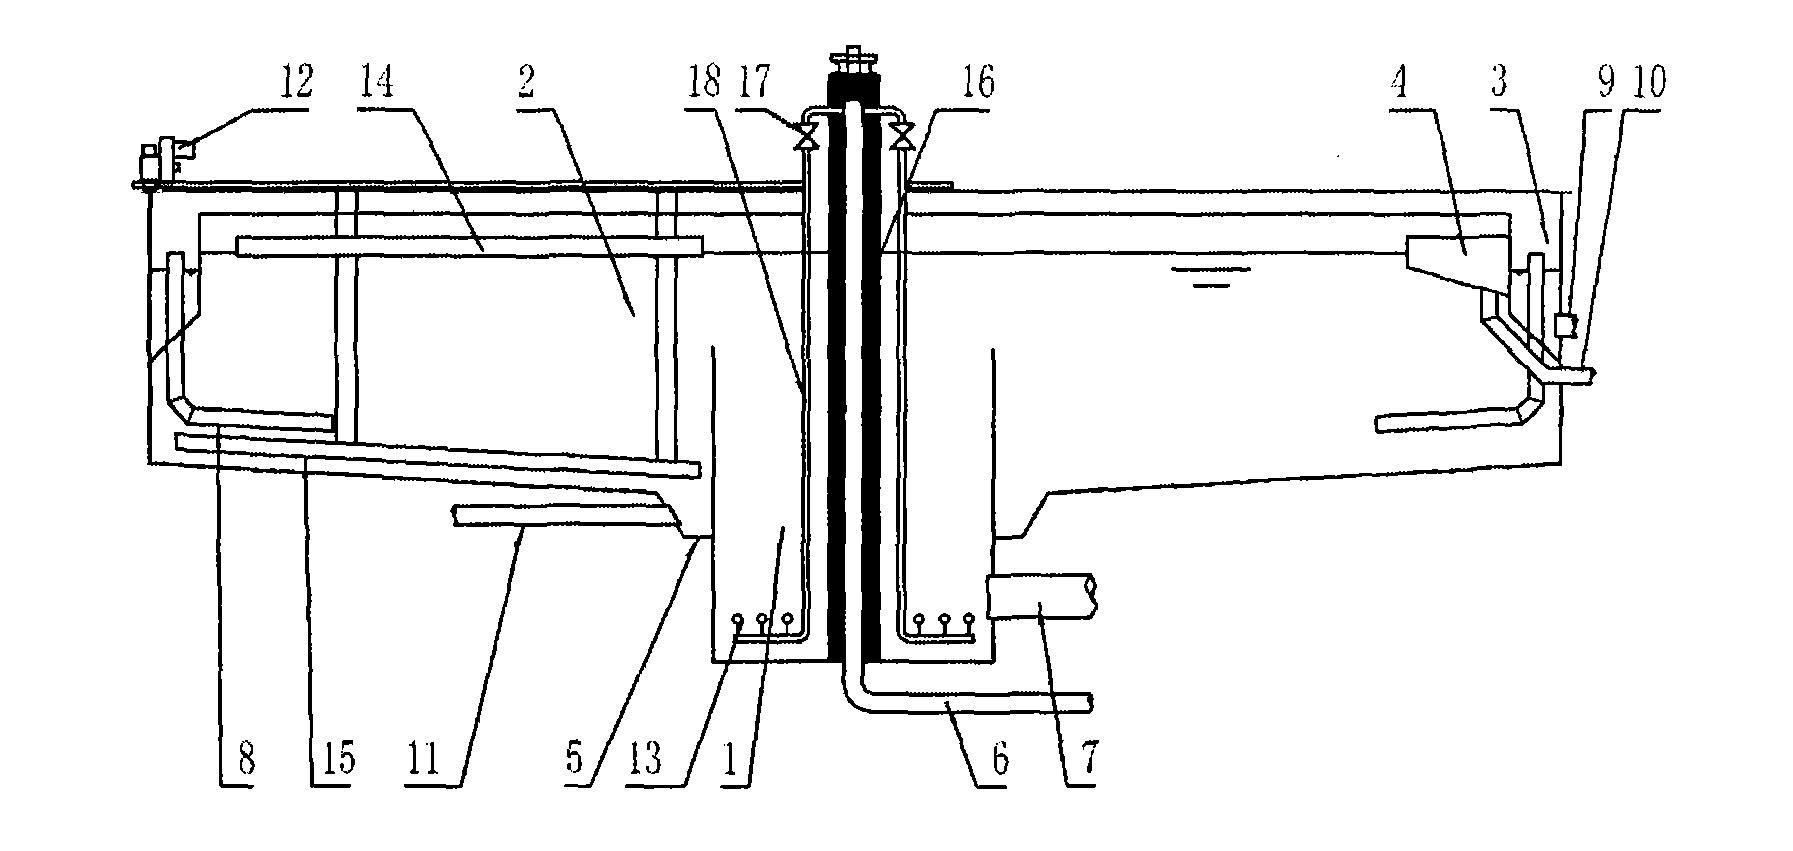 Radial-flow air-flotation thickening apparatus for sludge